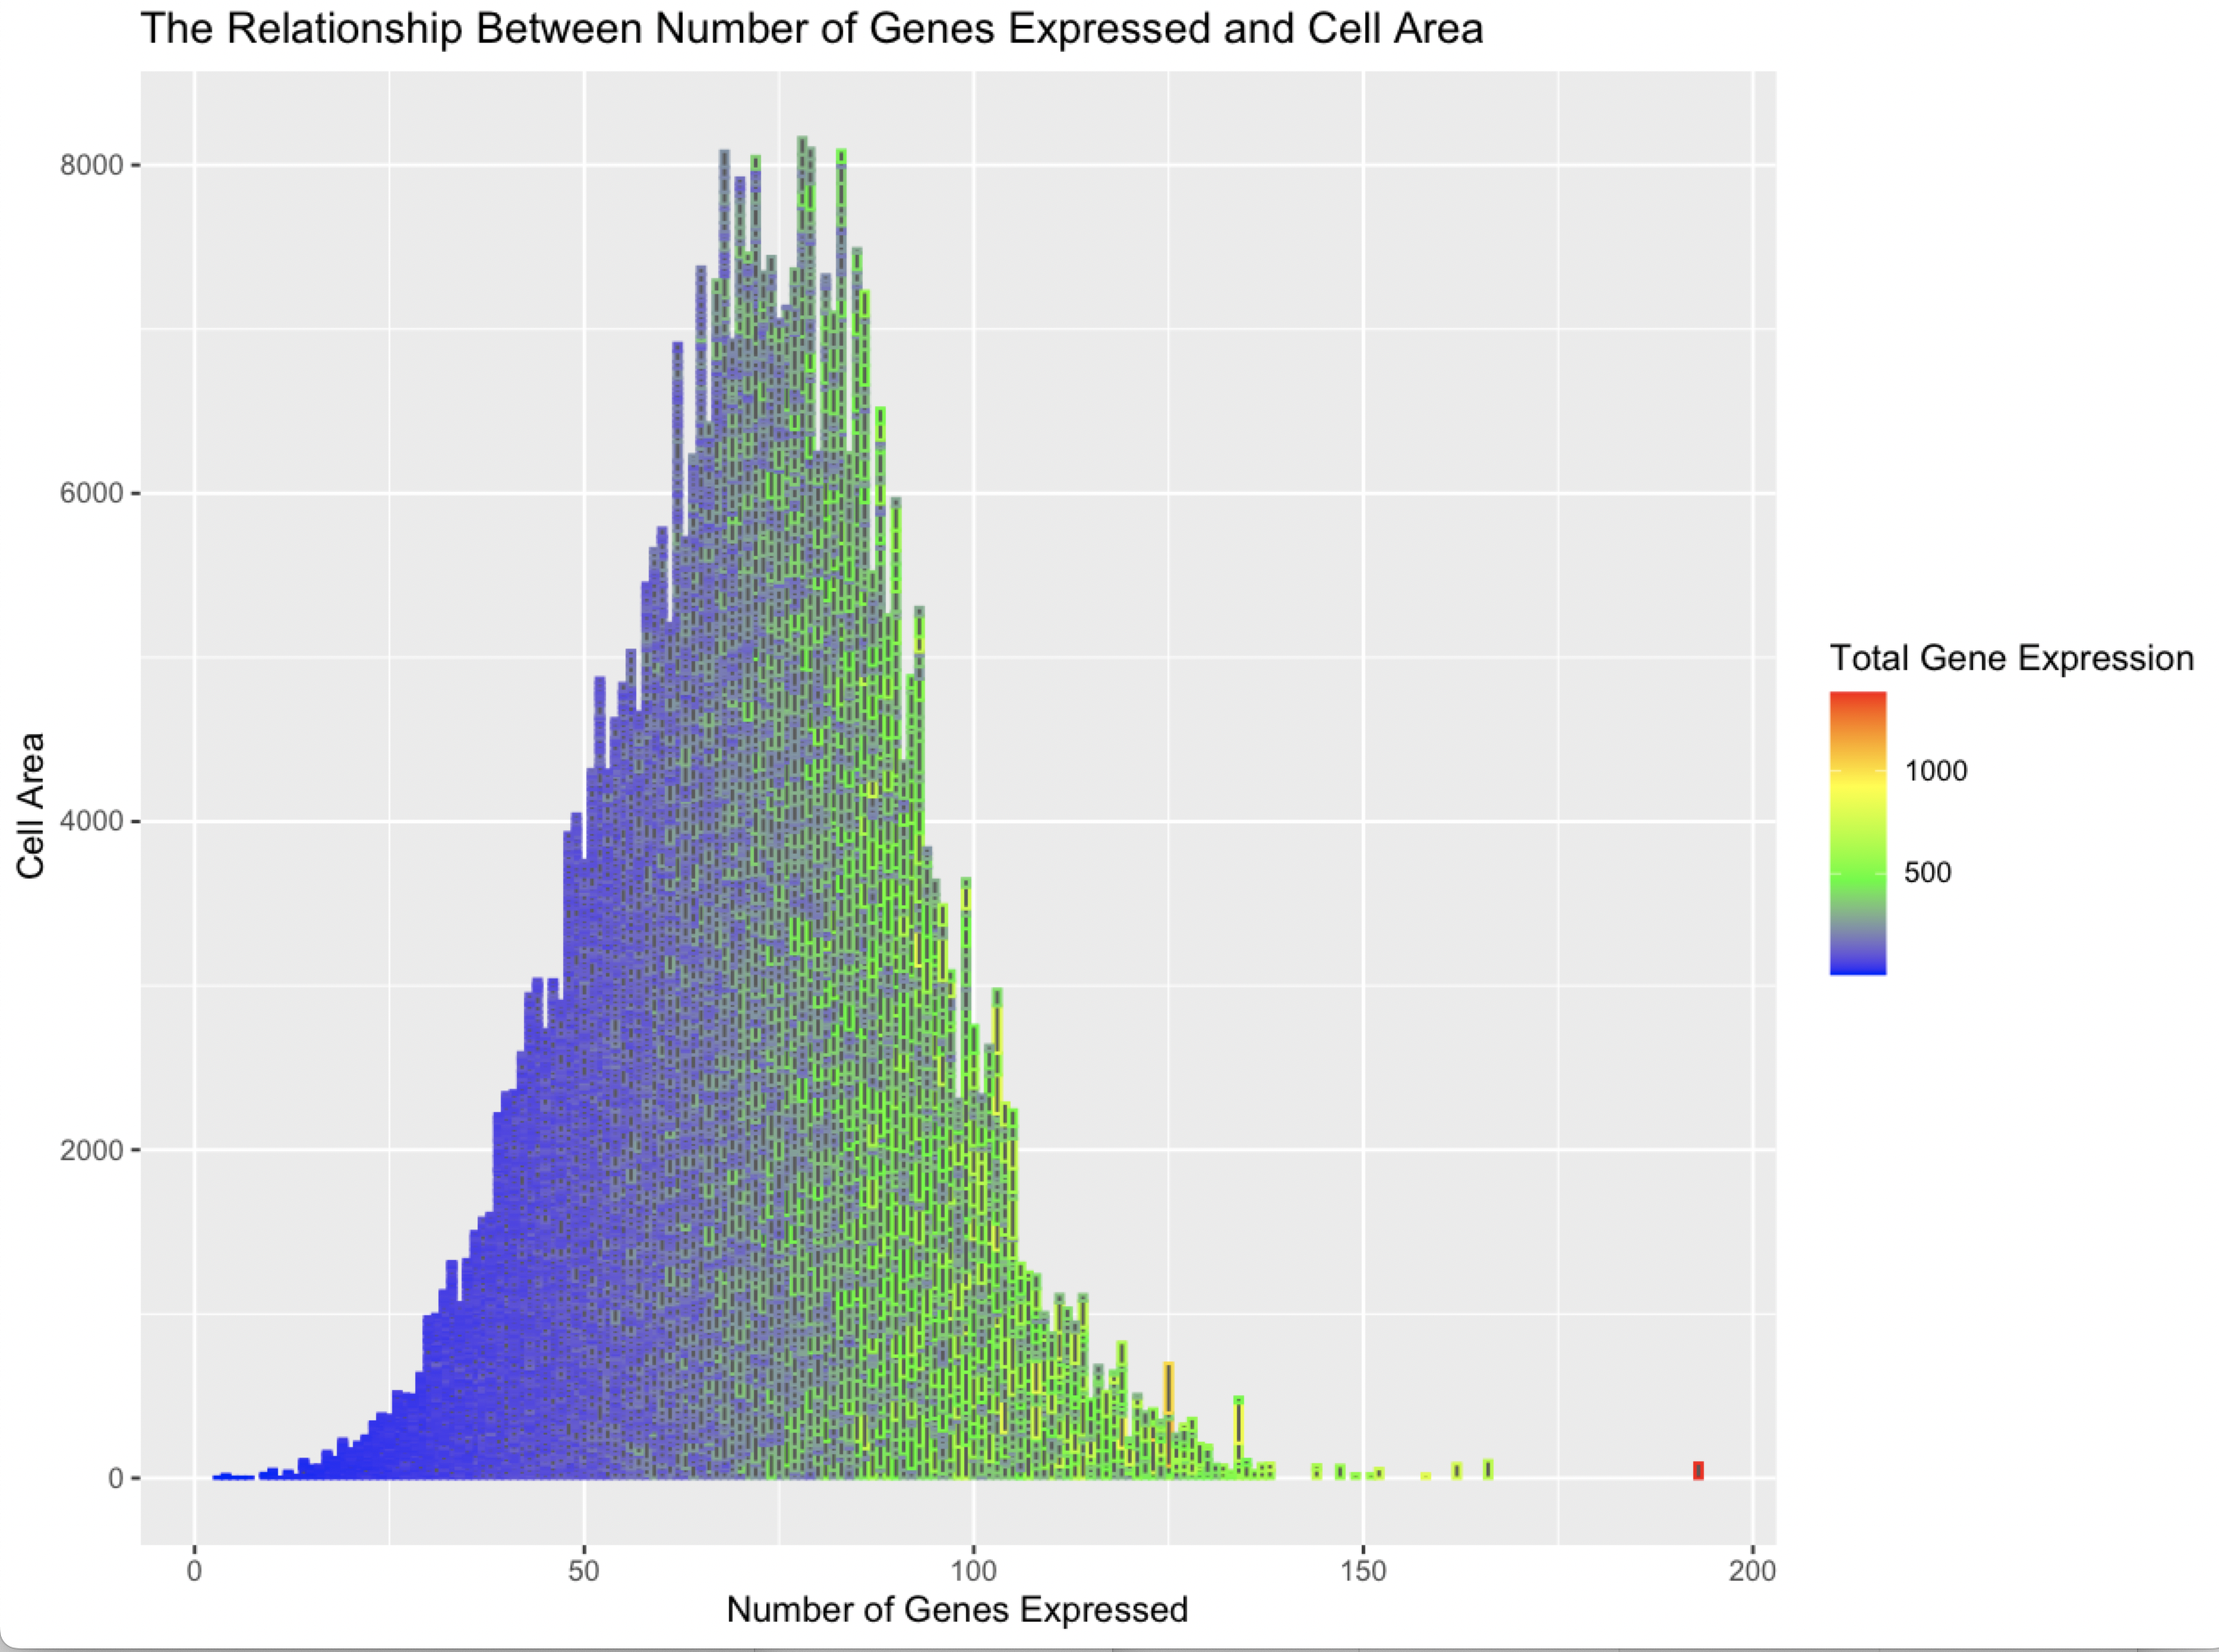 Relationship between Number of Genes Expressed and Cell Area